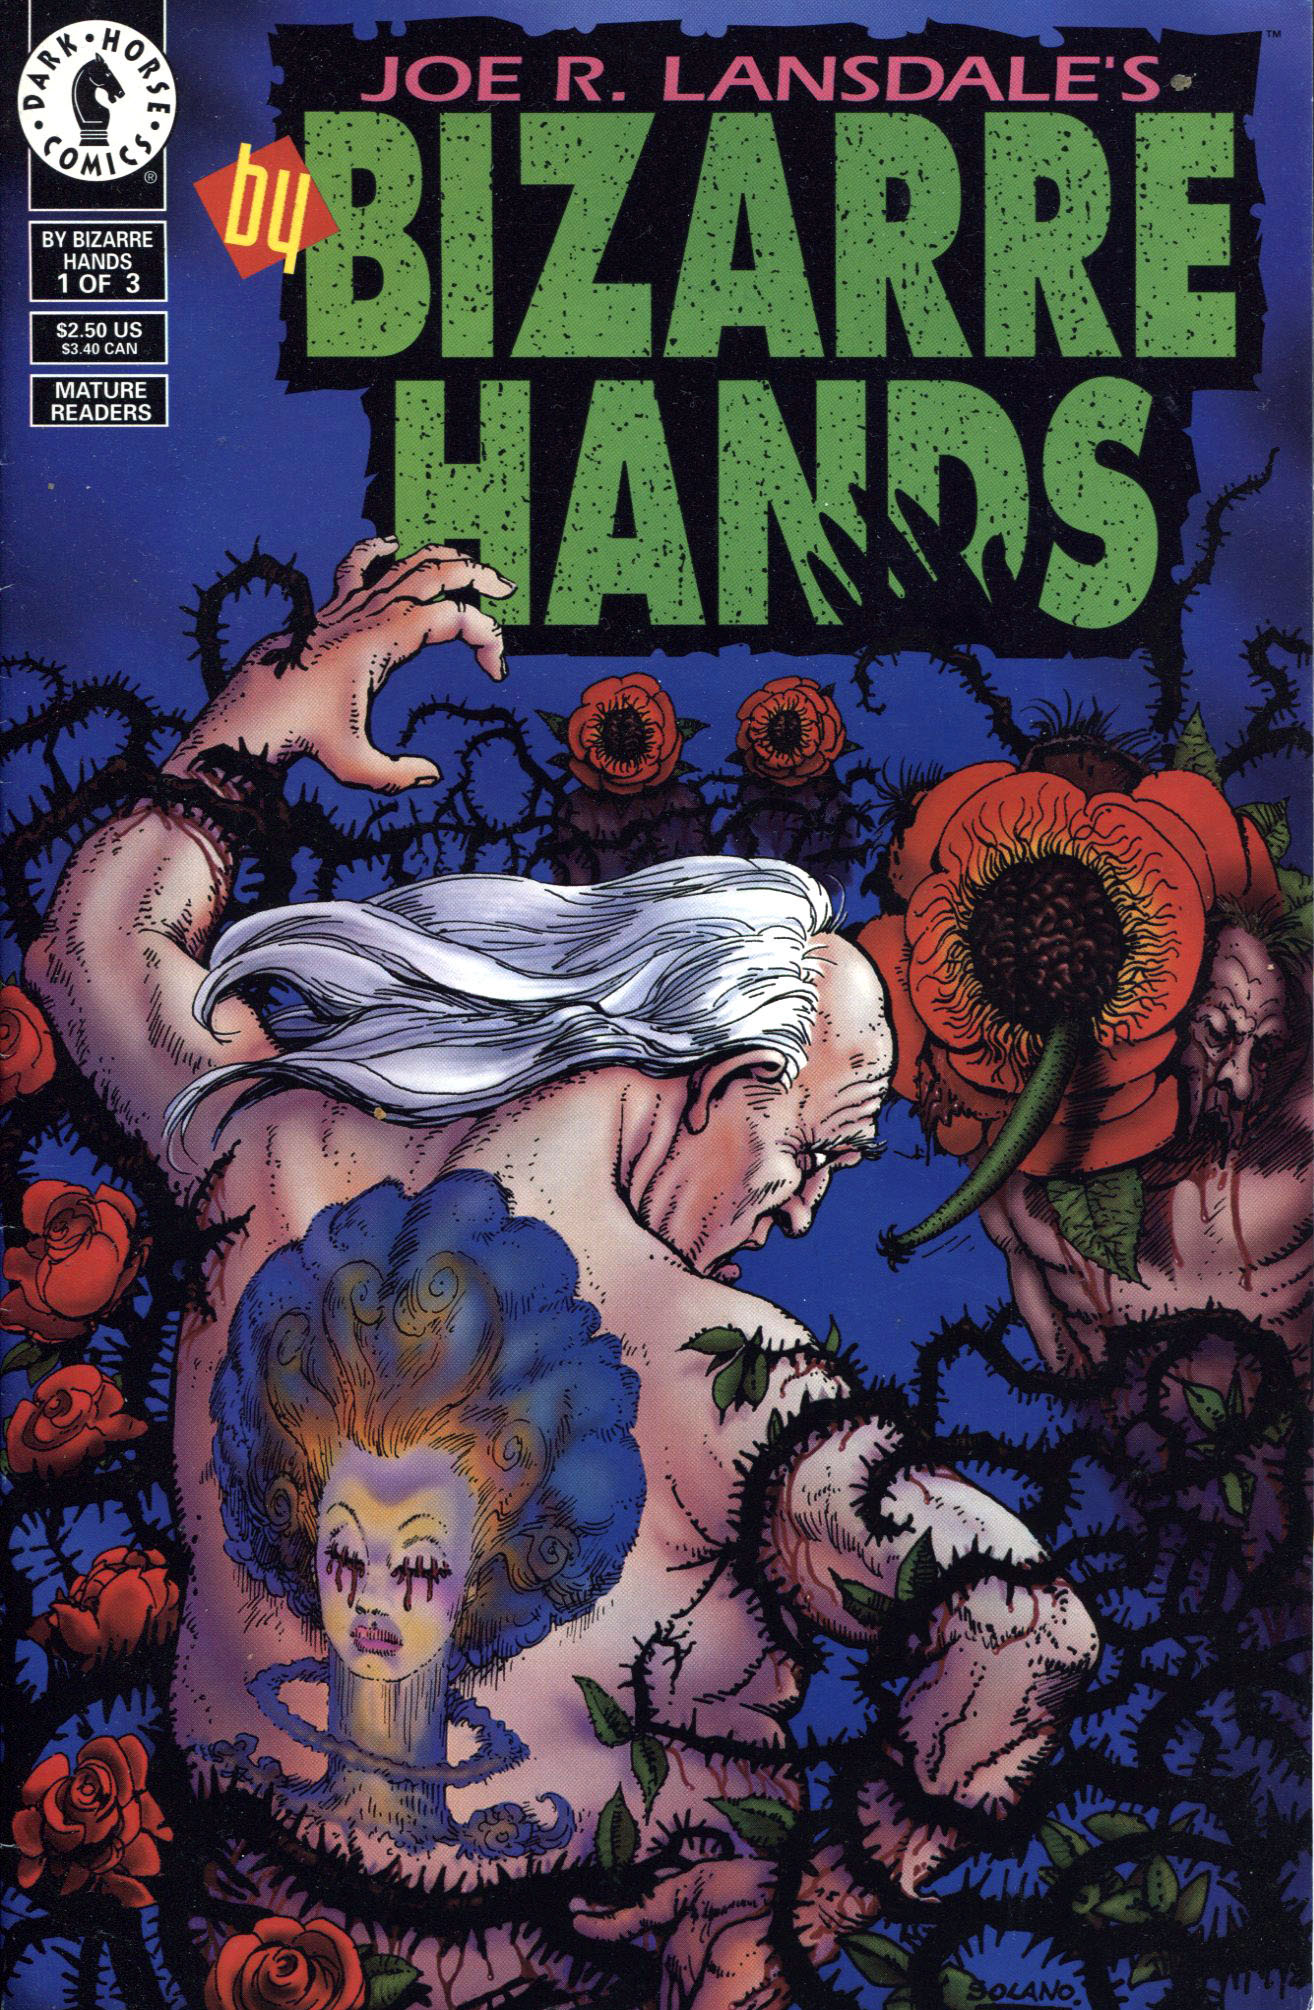 Read online By Bizarre Hands comic -  Issue #1 - 1